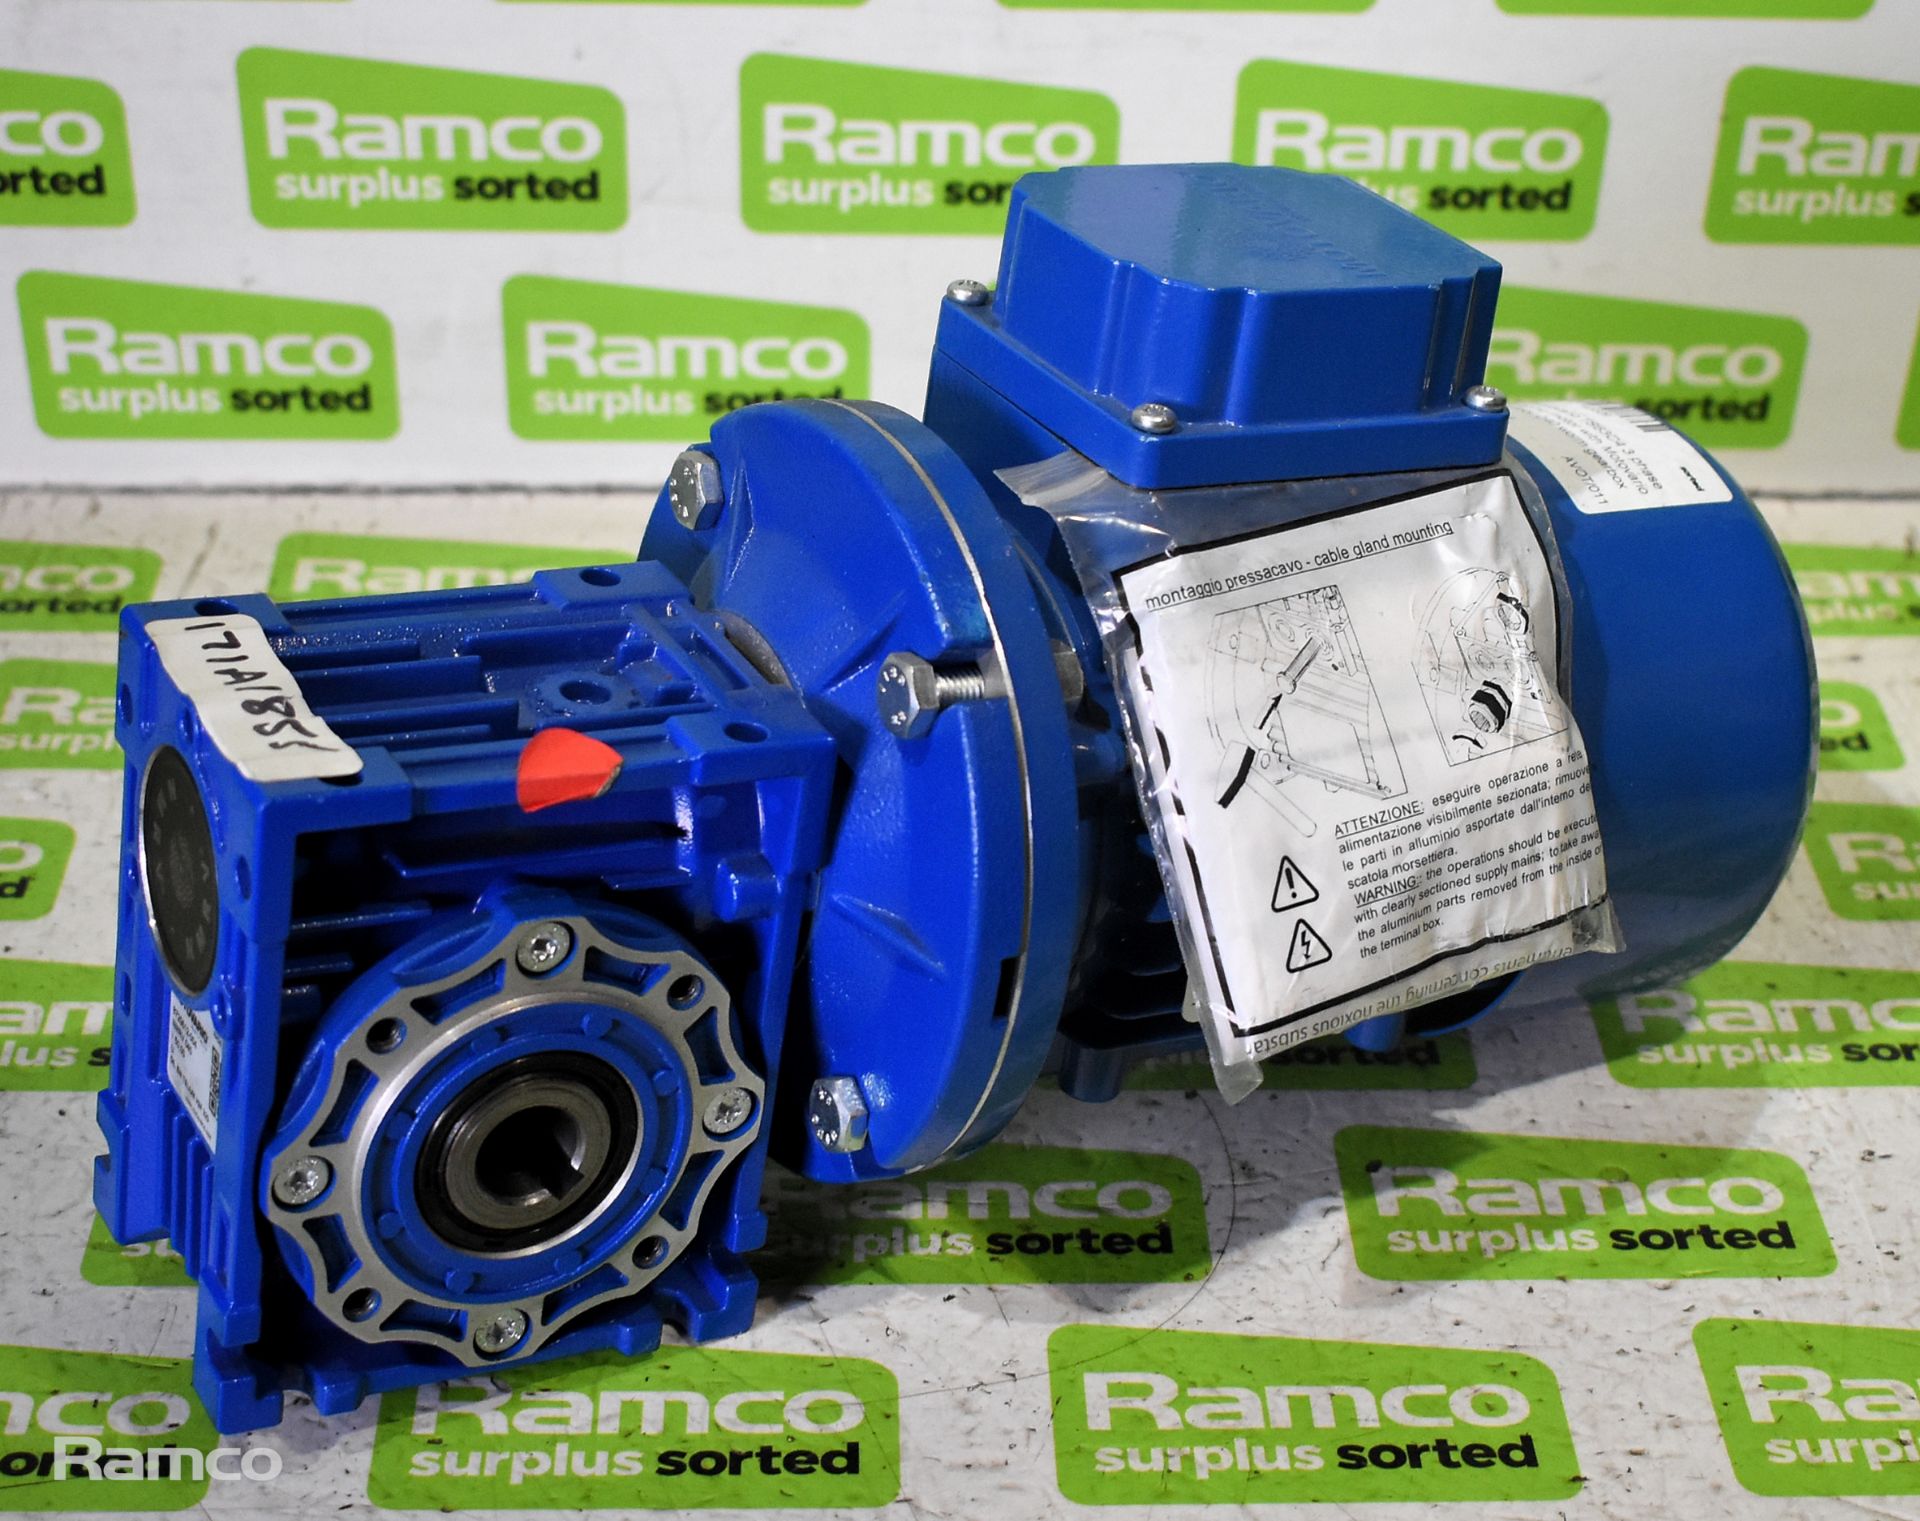 Motovario TS63C4 3 phase electric motor with Motovario NMRV 040 worm gearbox - Image 4 of 5